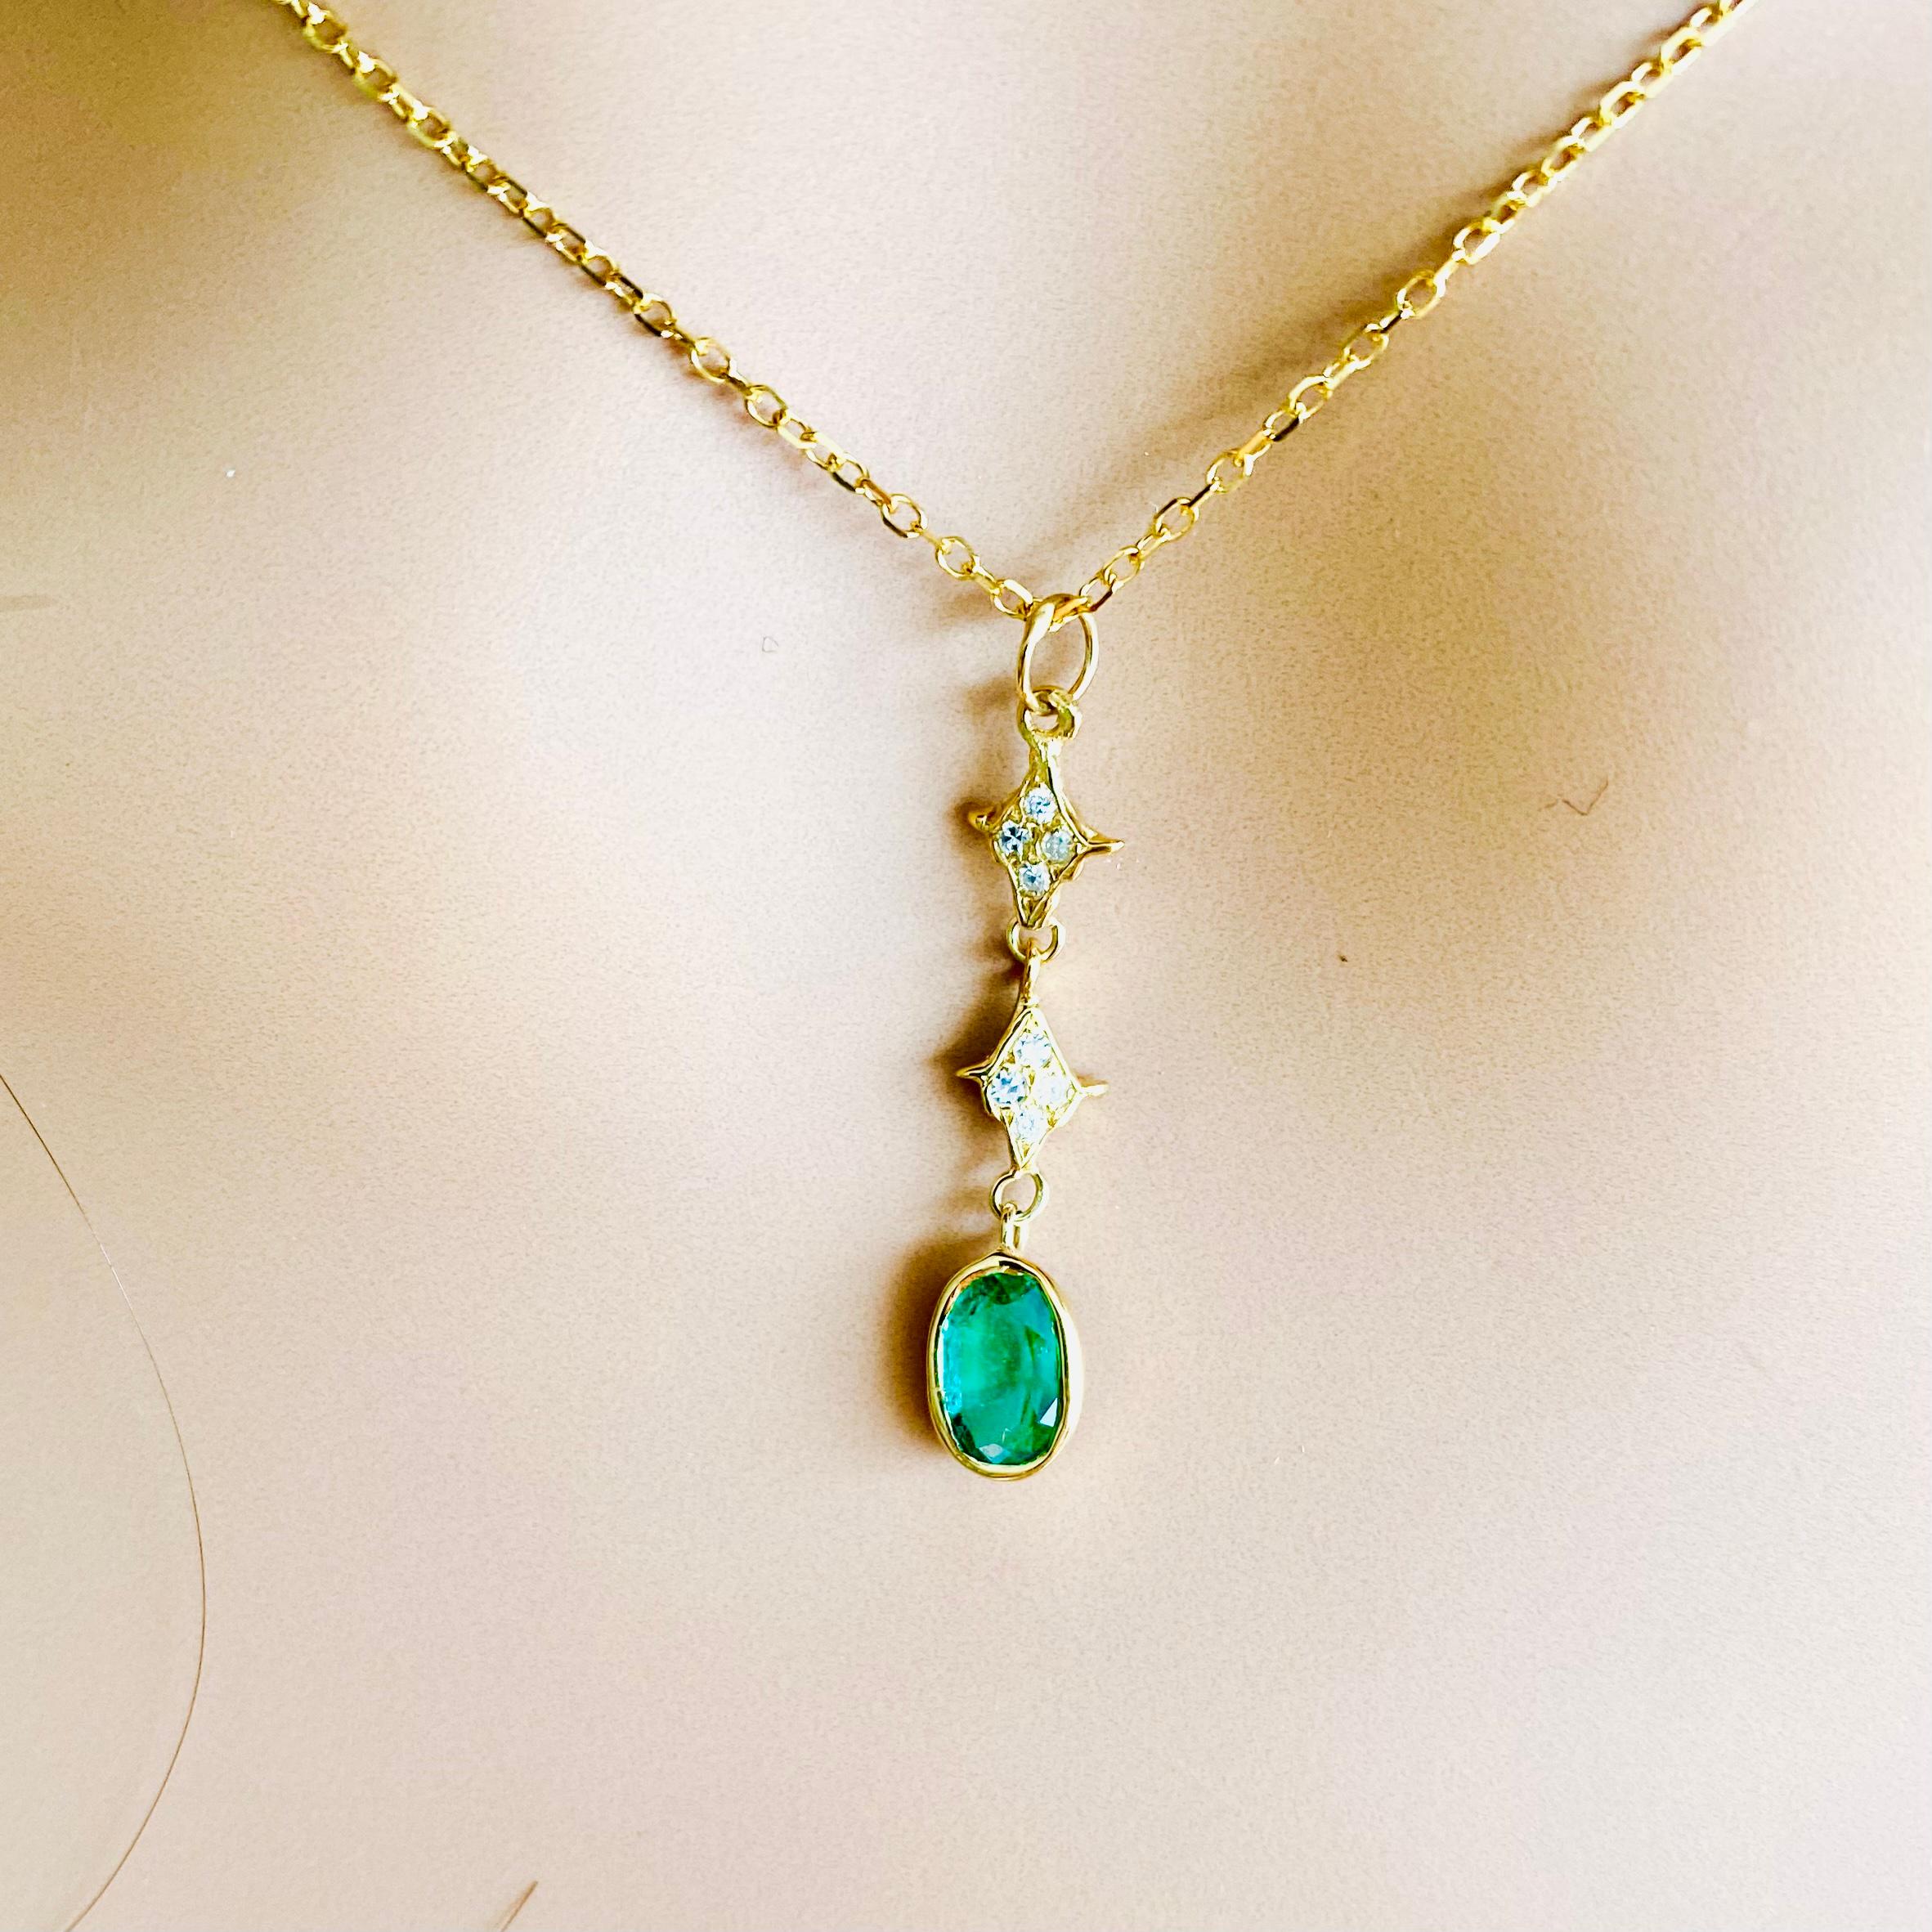 16 inch necklace with pendant